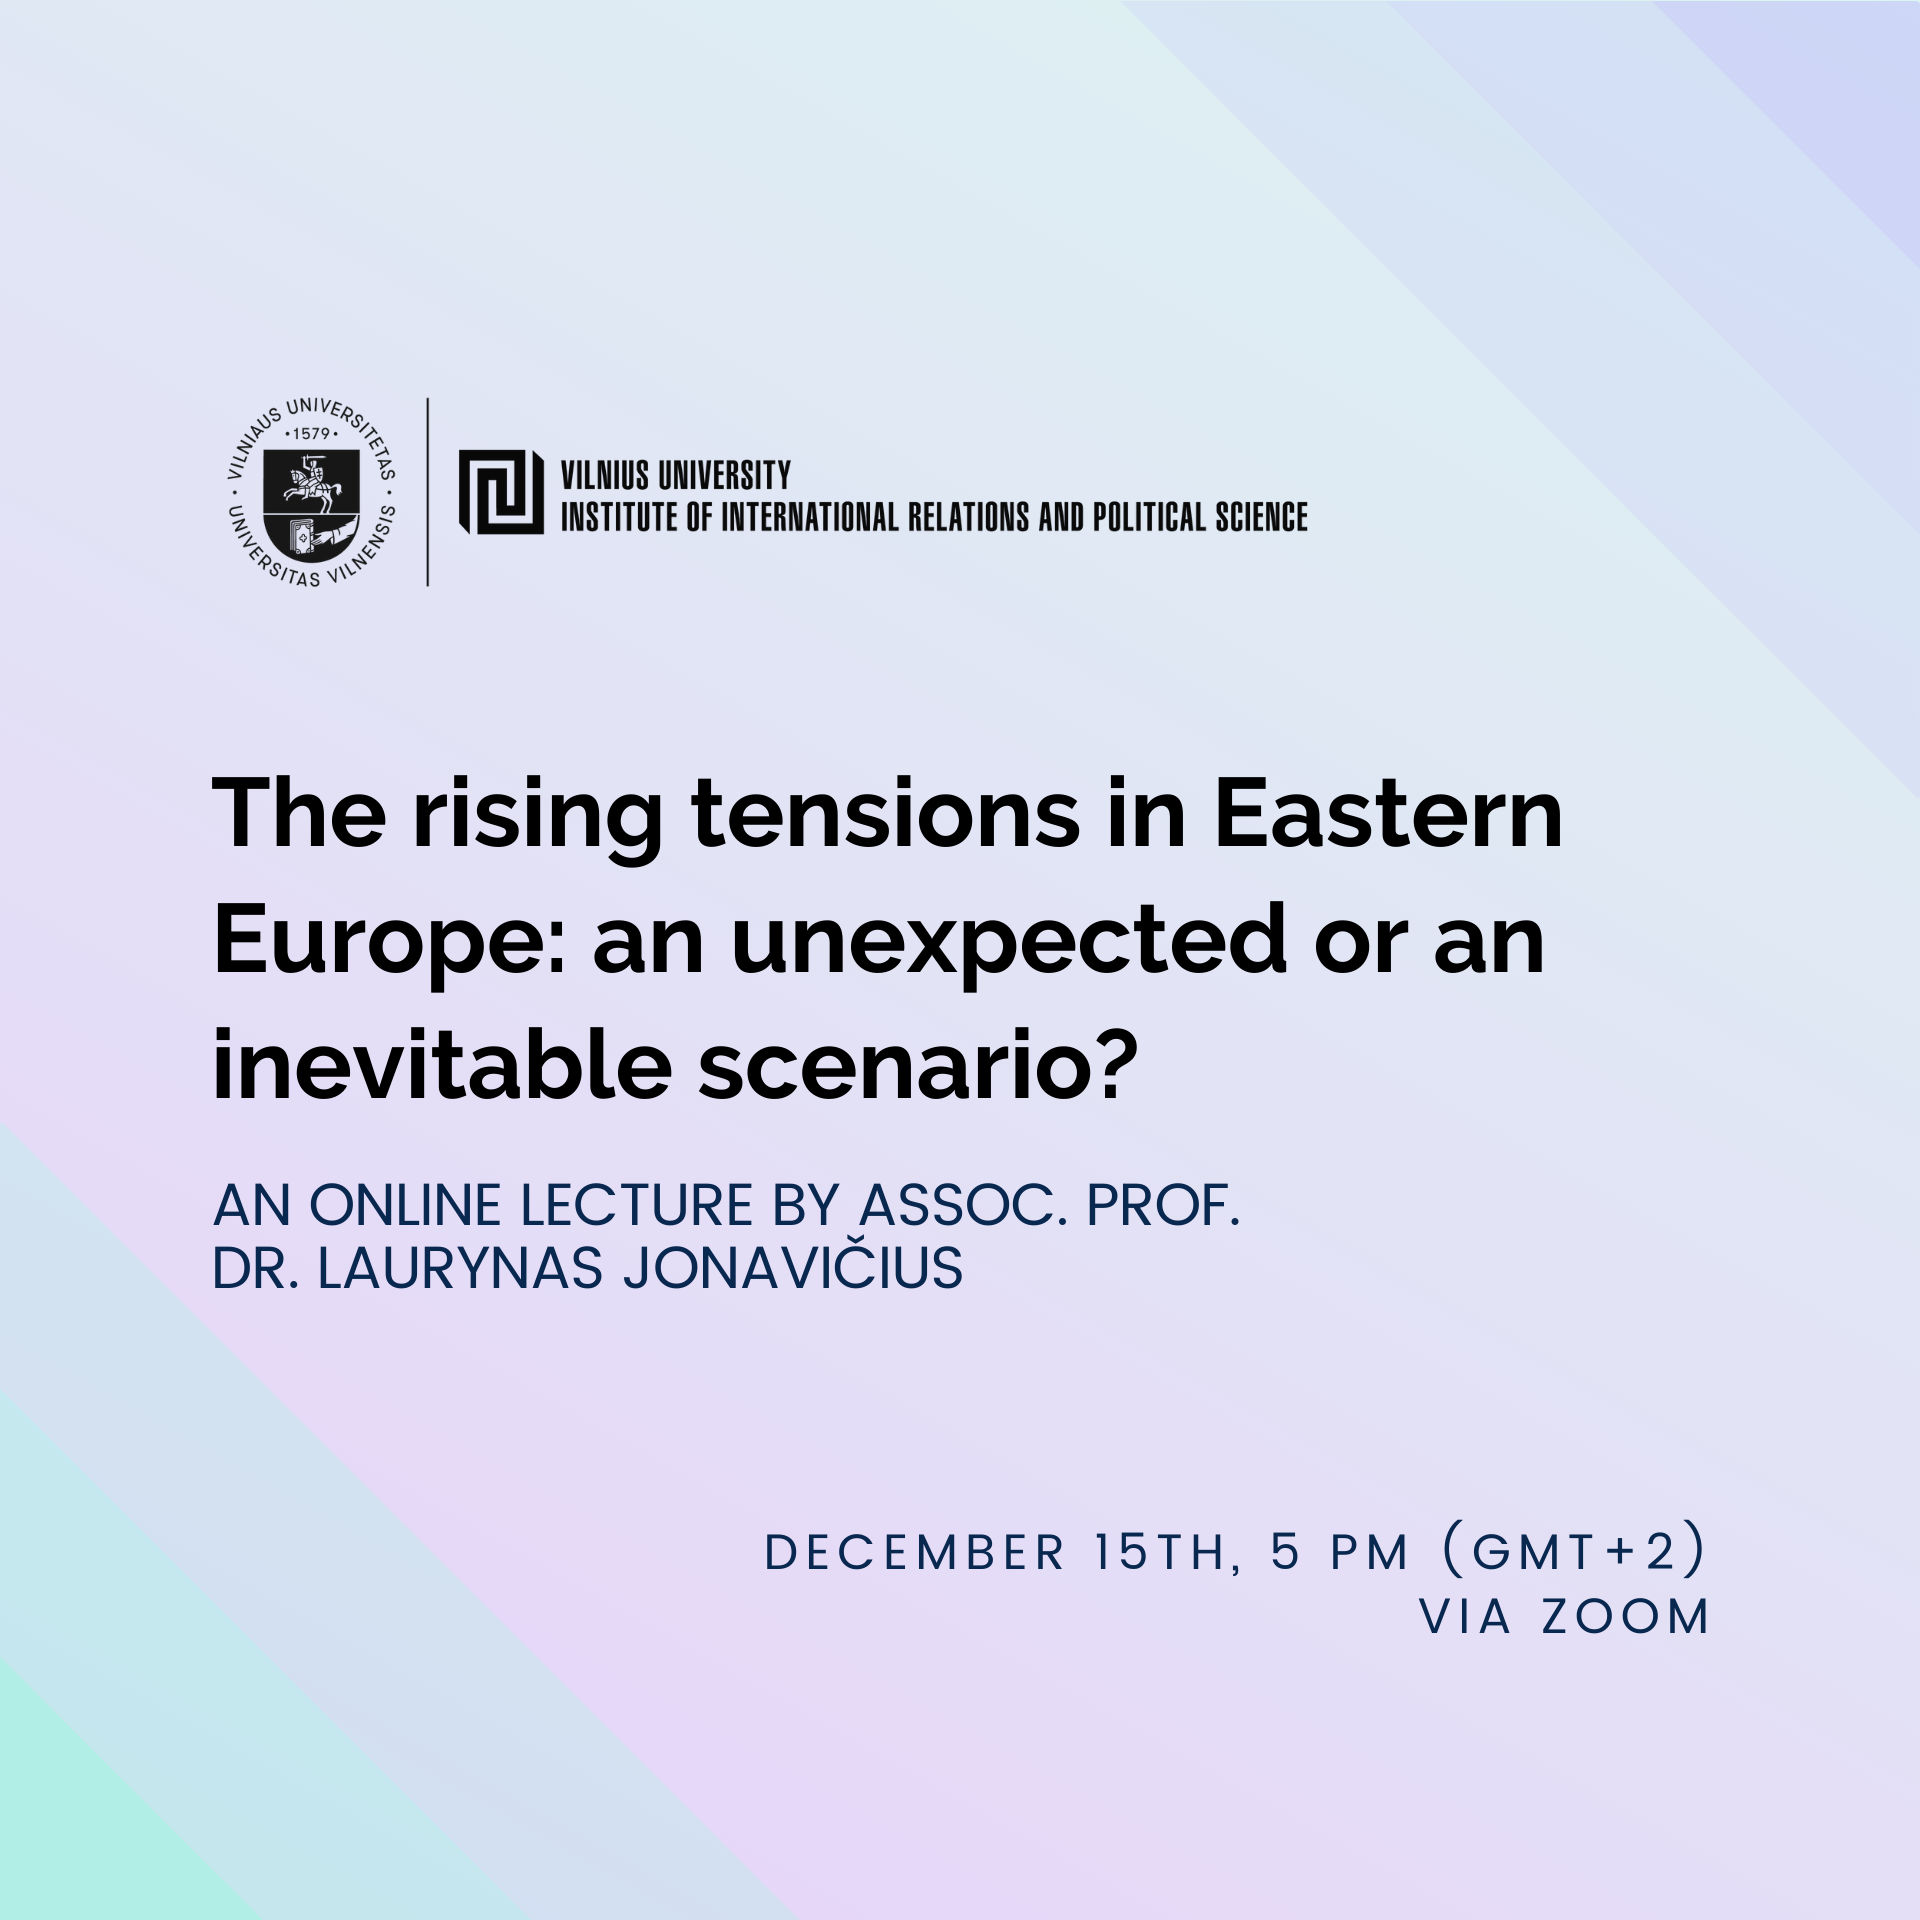 Open lecture “The rising tensions in Eastern Europe: an unexpected or an inevitable scenario?”